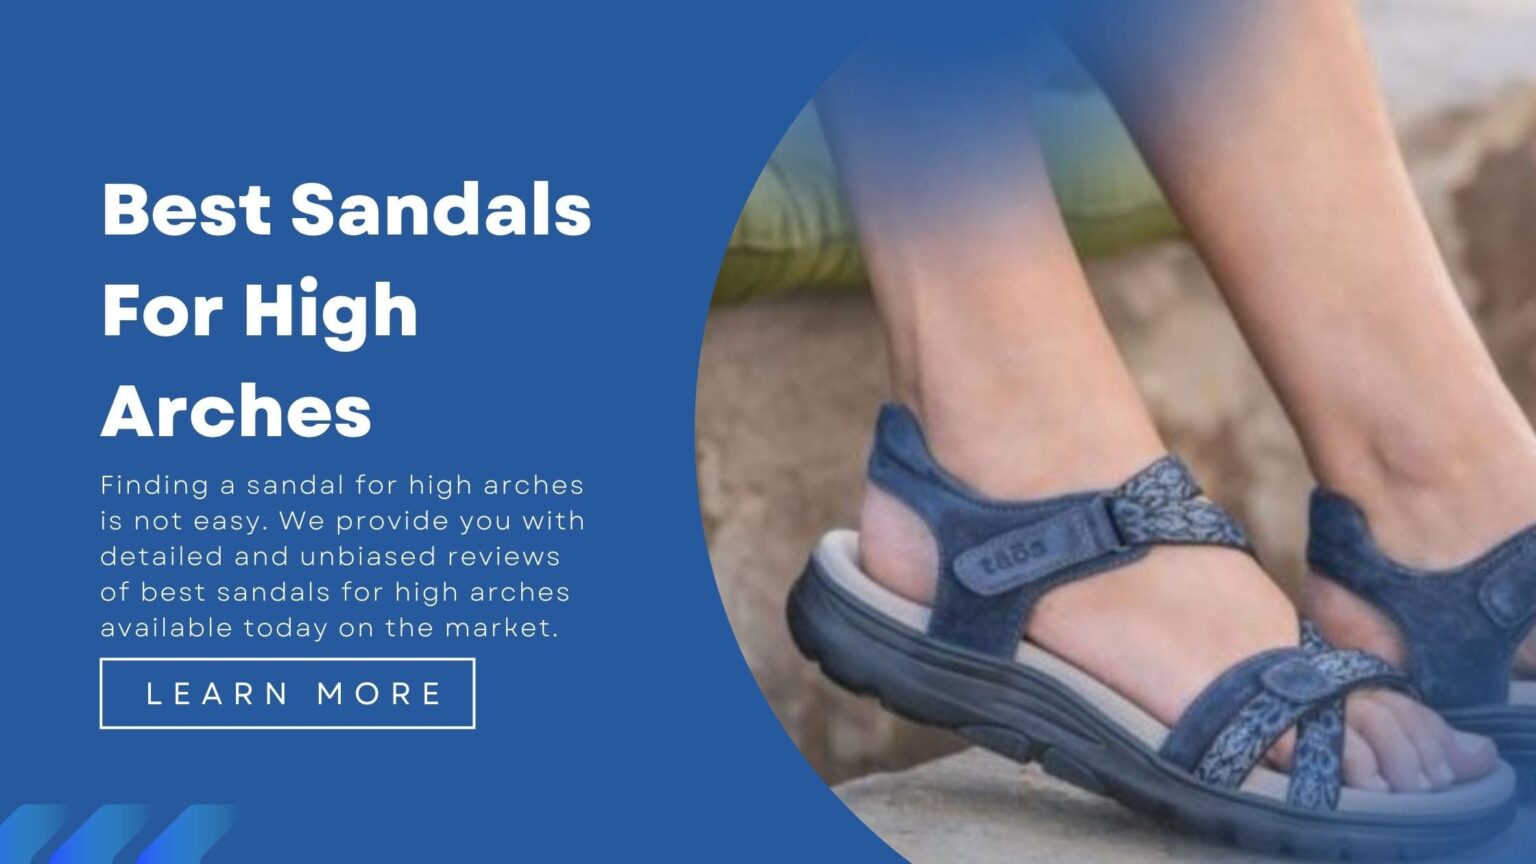 10 Best Sandals For High Arches – In Depth Review (2022 Update)